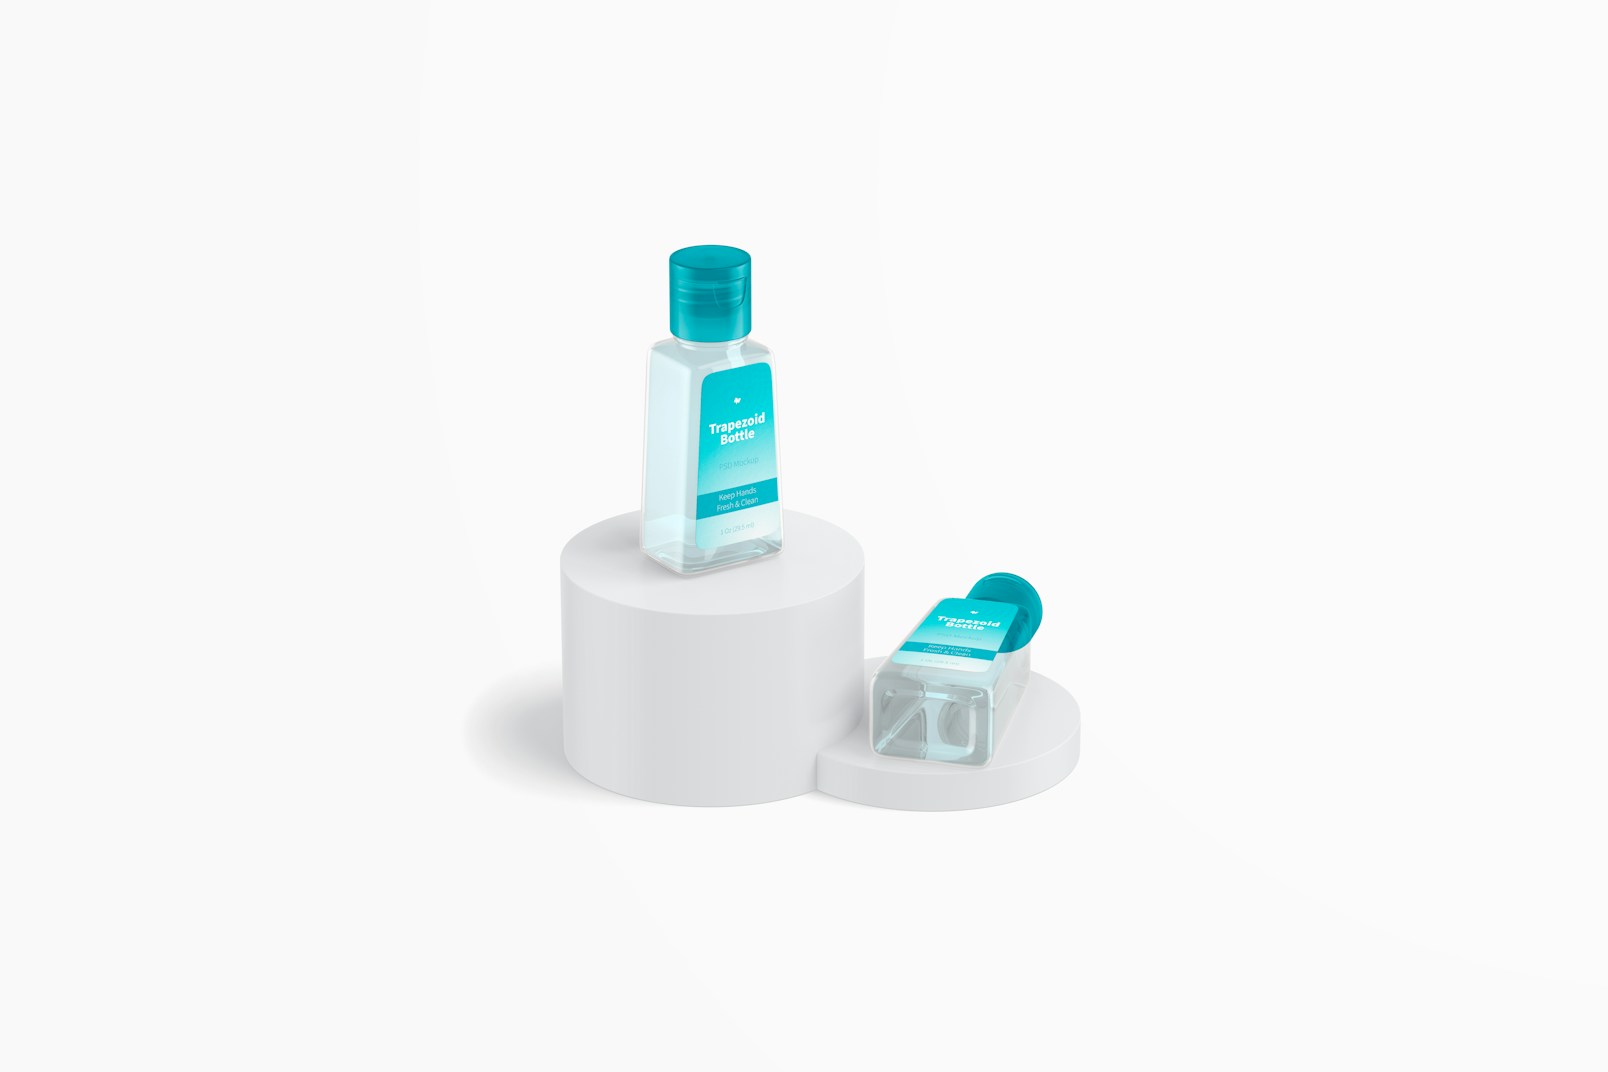 1 Oz Trapezoid Bottles Mockup, Standing and Dropped